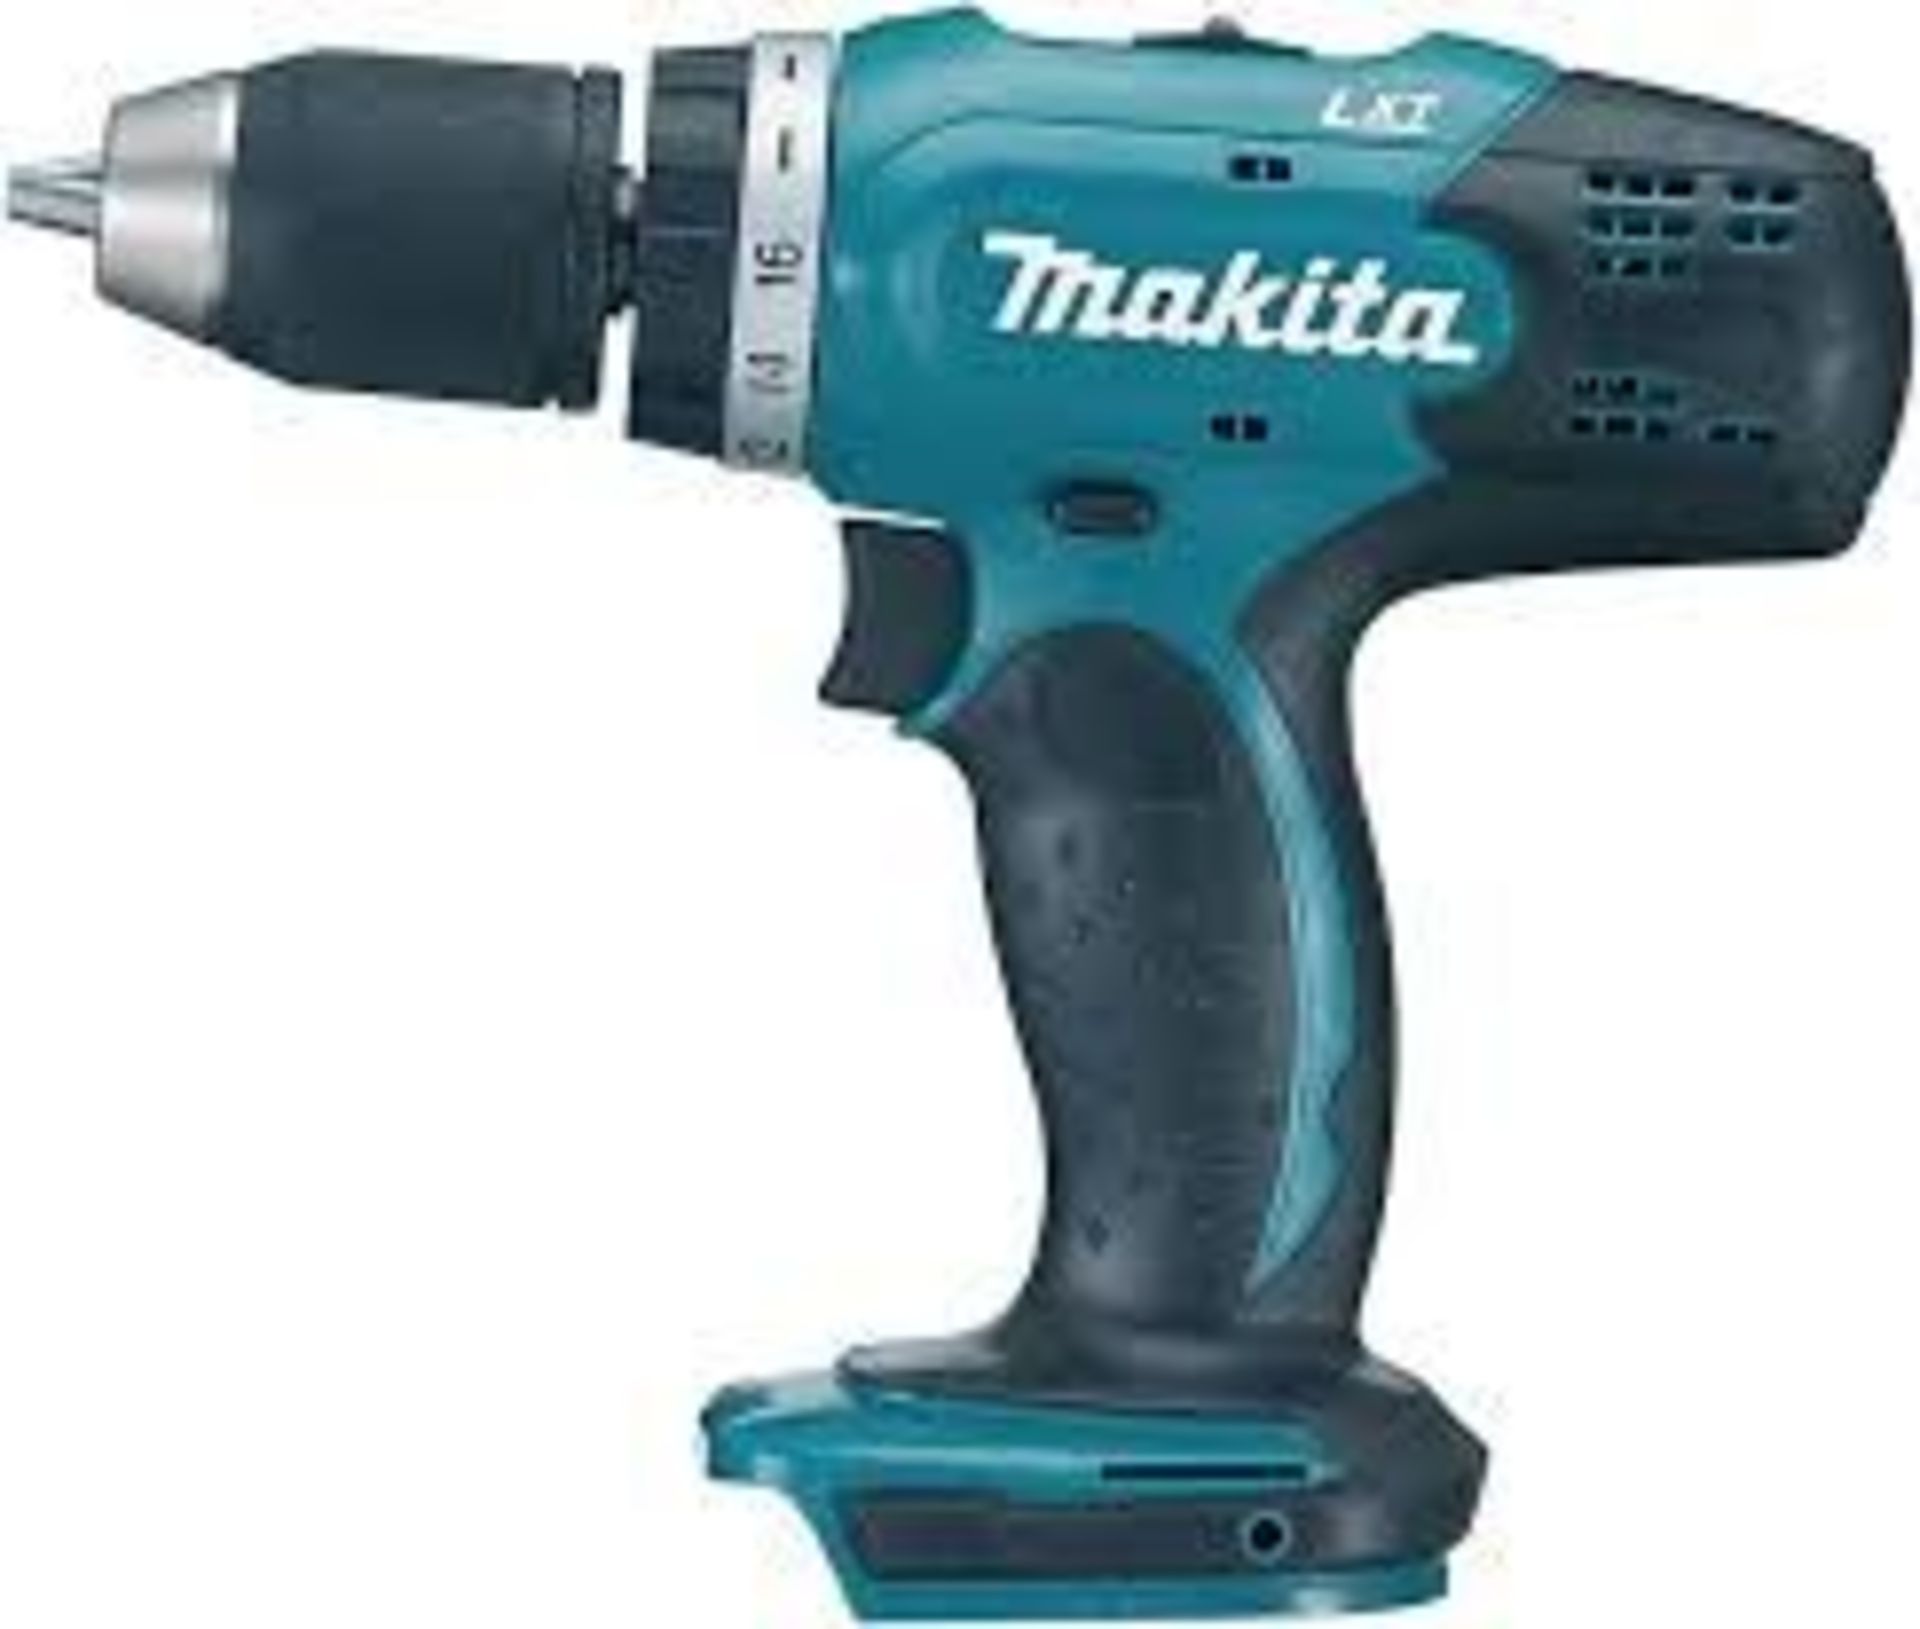 Makita DDF453Z 18V Li-Ion LXT Drill Driver. R14.7. With Carry Case.